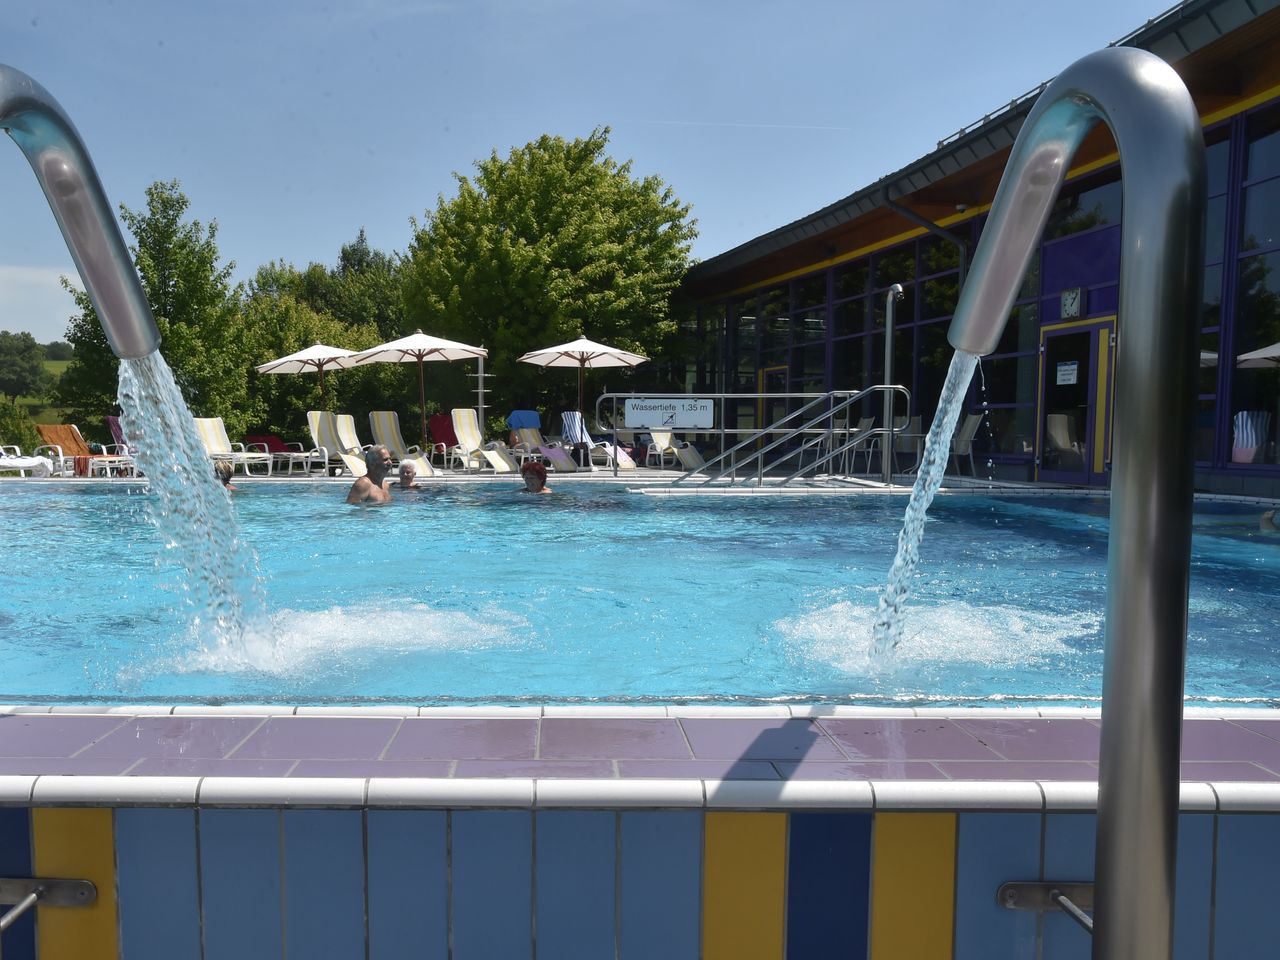 Das All-inklusiv Angebot- 6 Tage Entspannung & Therme